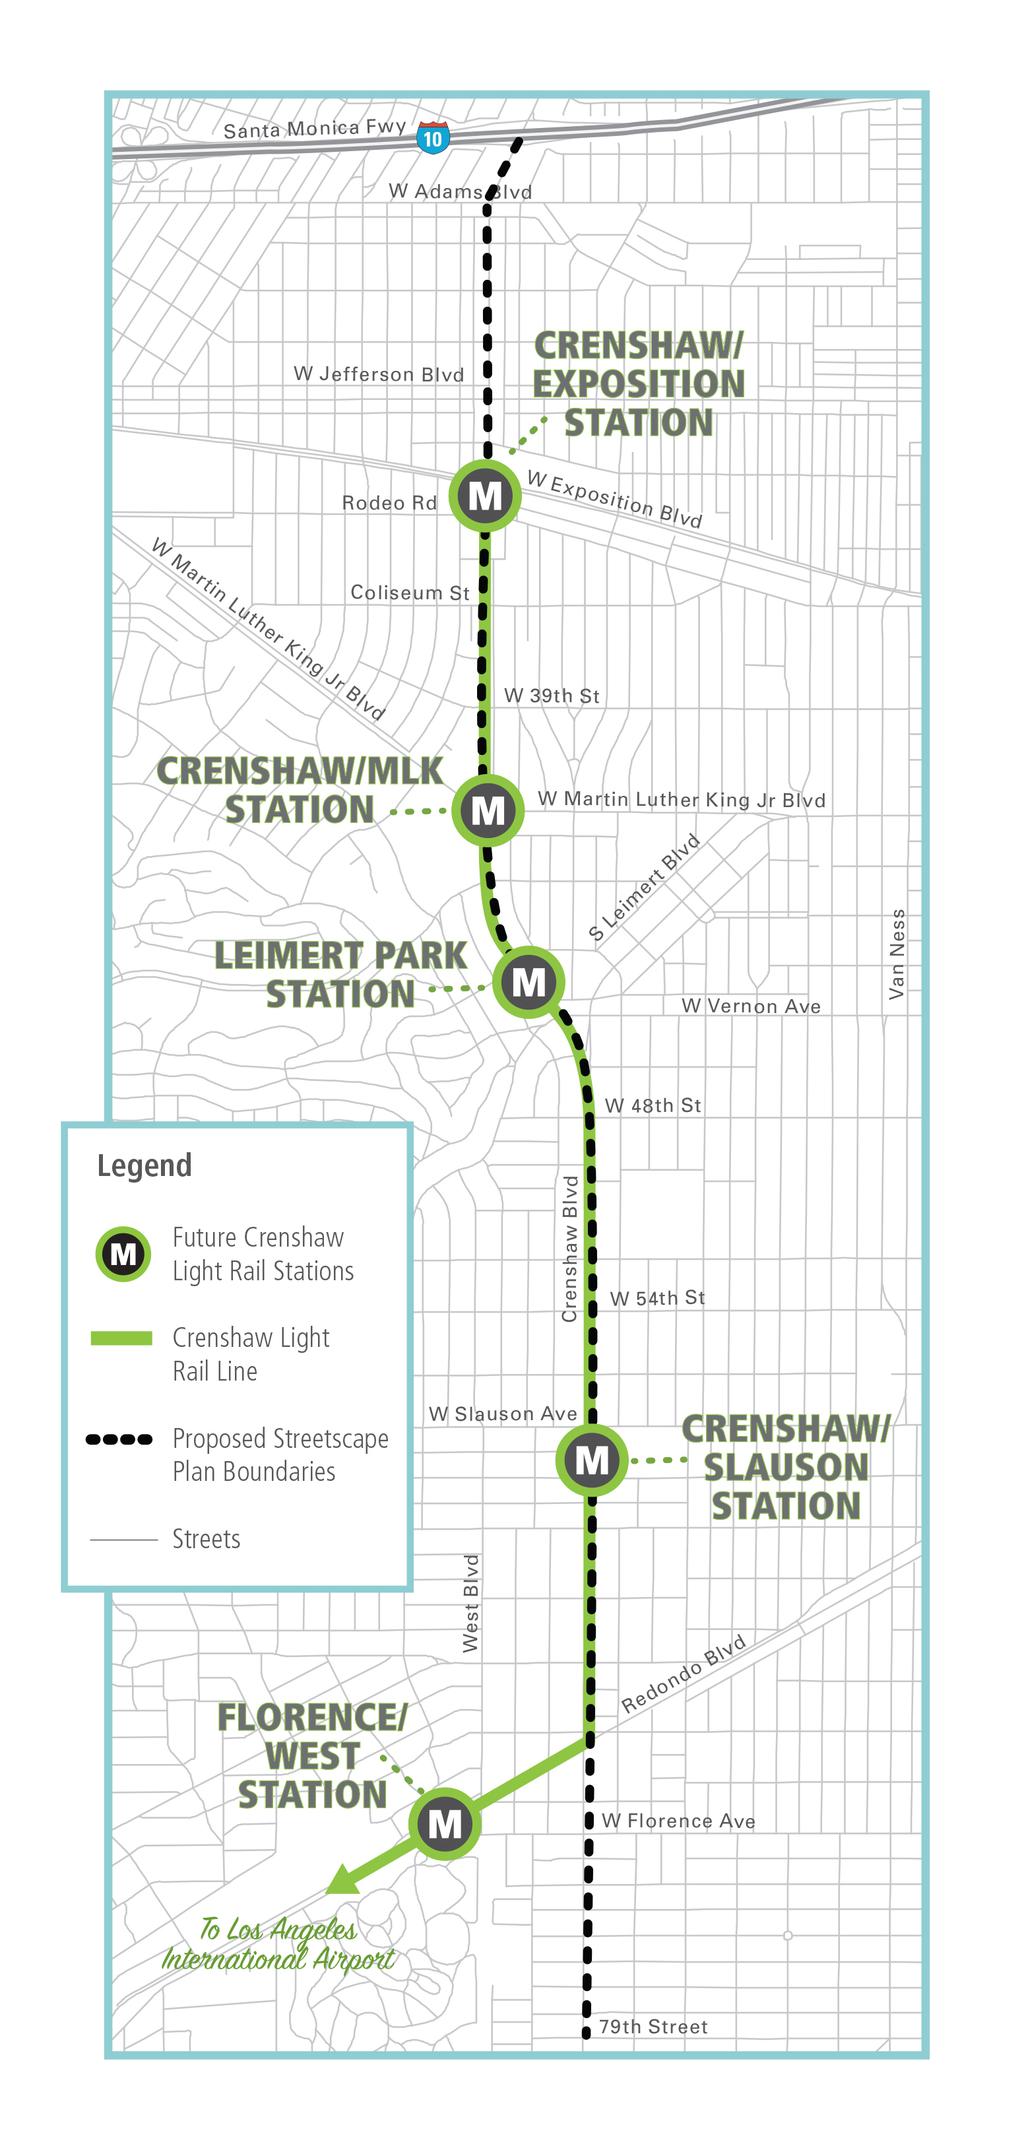 Basic information about Crenshaw/LAX Line An 8.5mile extension from the Metro Exposition Line at Crenshaw and Exposition to the Metro Green Line Aviation/LAX Station.